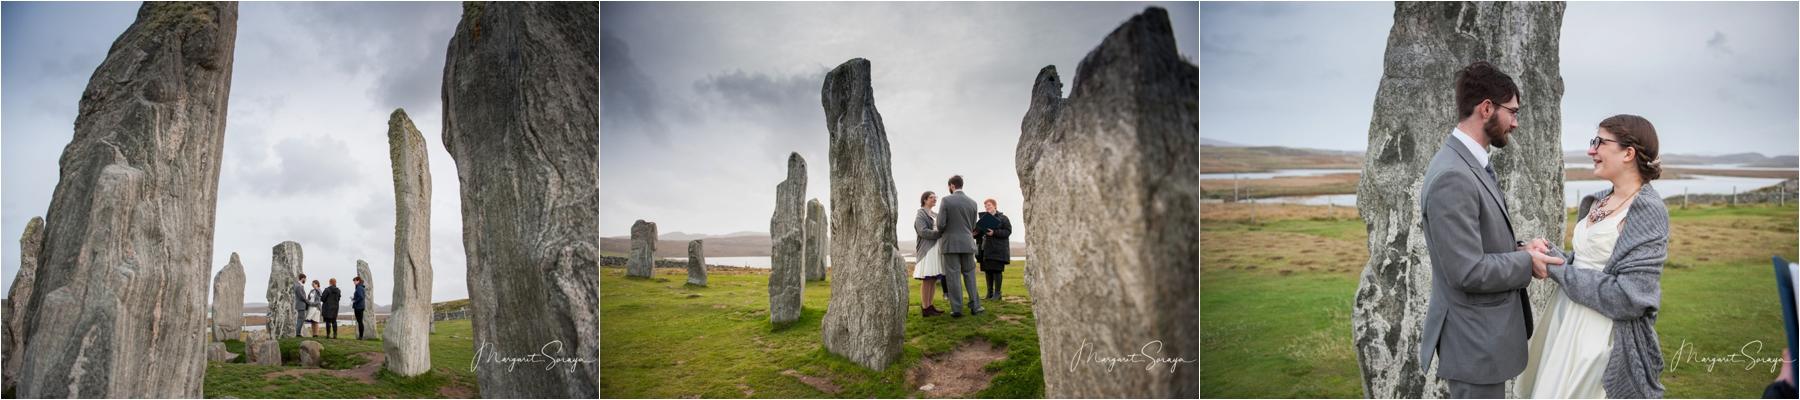 Getting married at callanish stones stornoway elopement photographer 